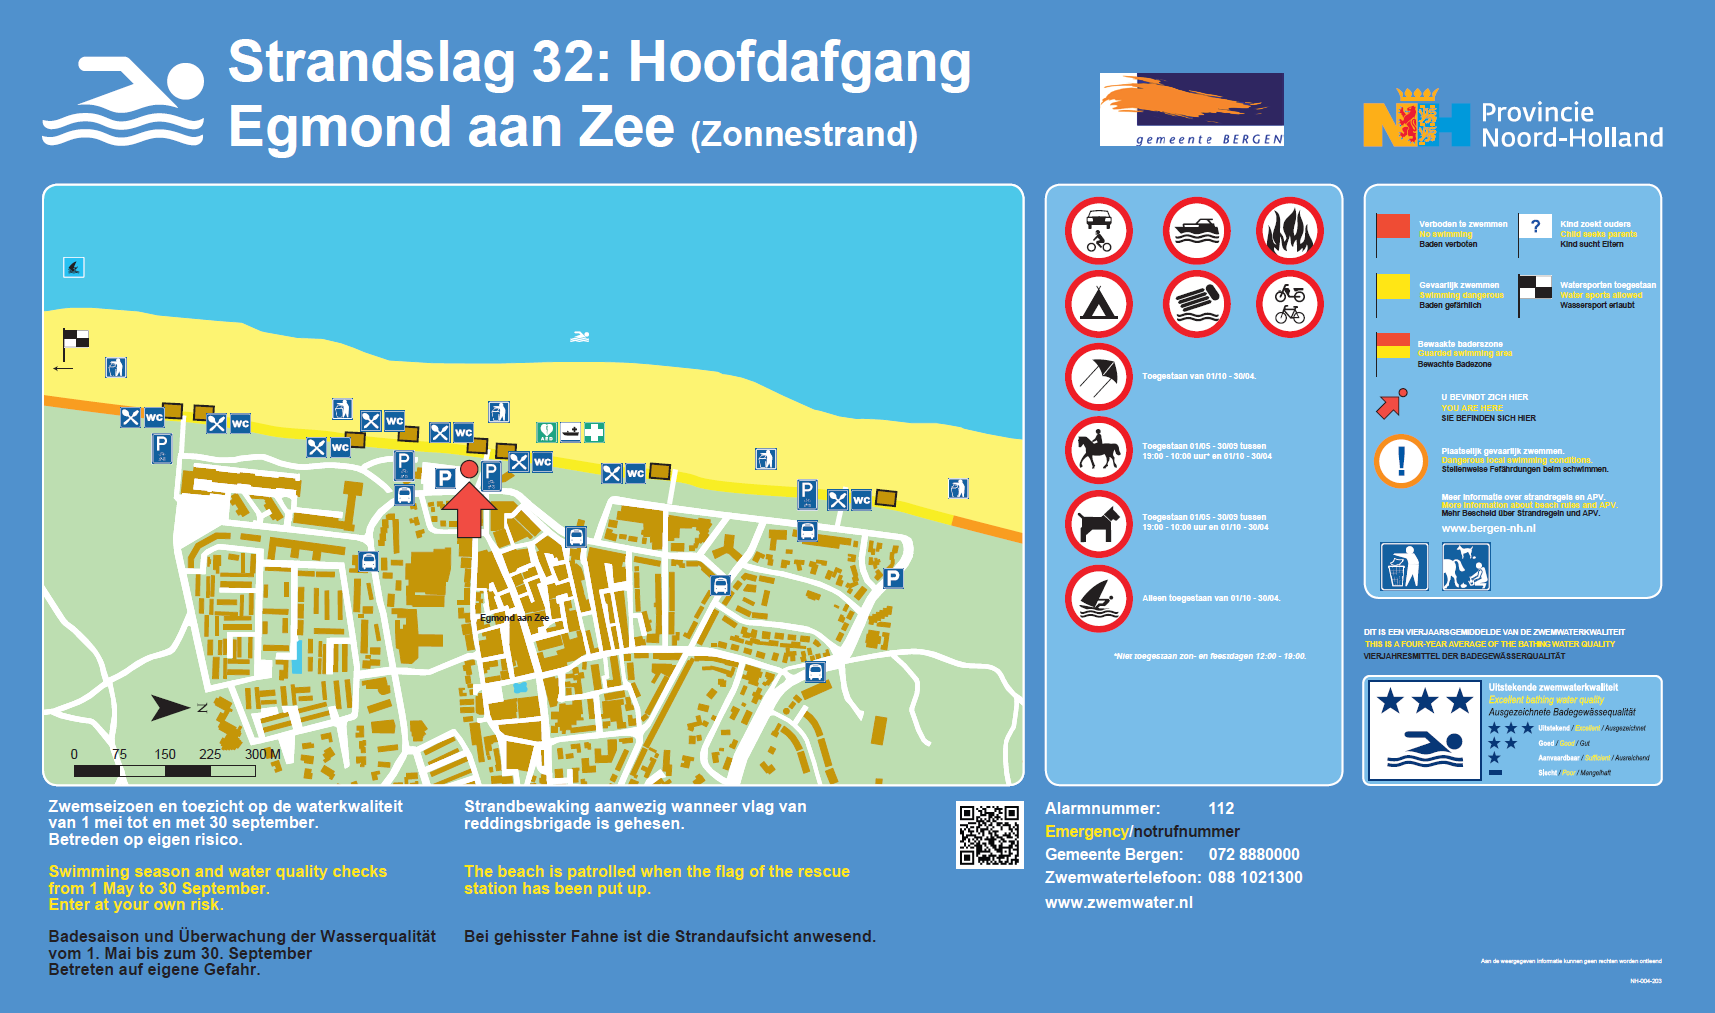 The information board at the swimming location Egmond aan Zee Strandslag 32 zonnestrand